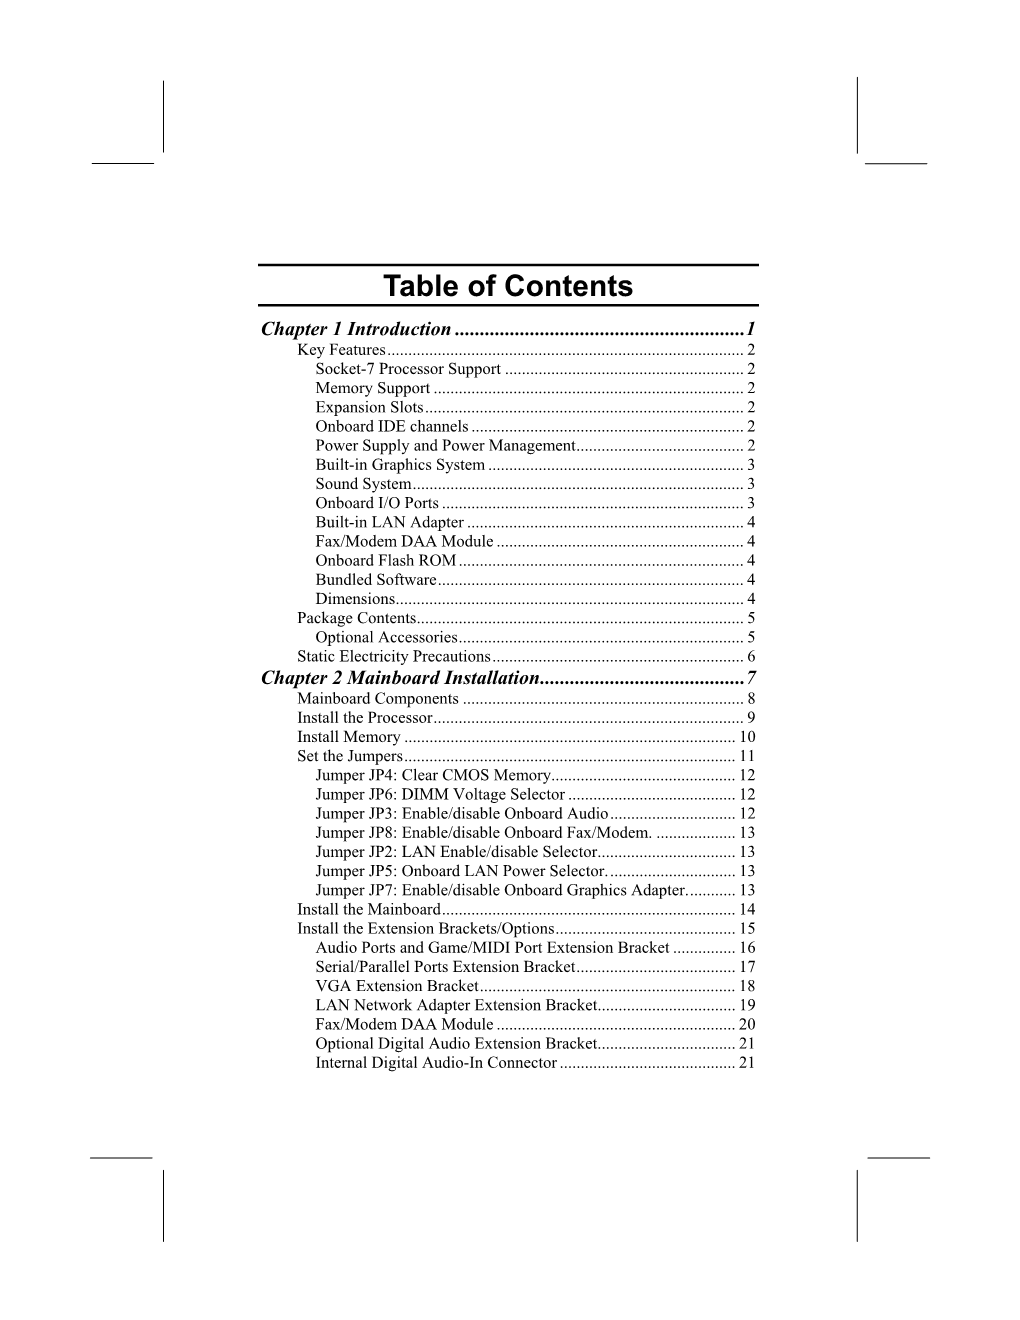 Table of Contents Chapter 1 Introduction